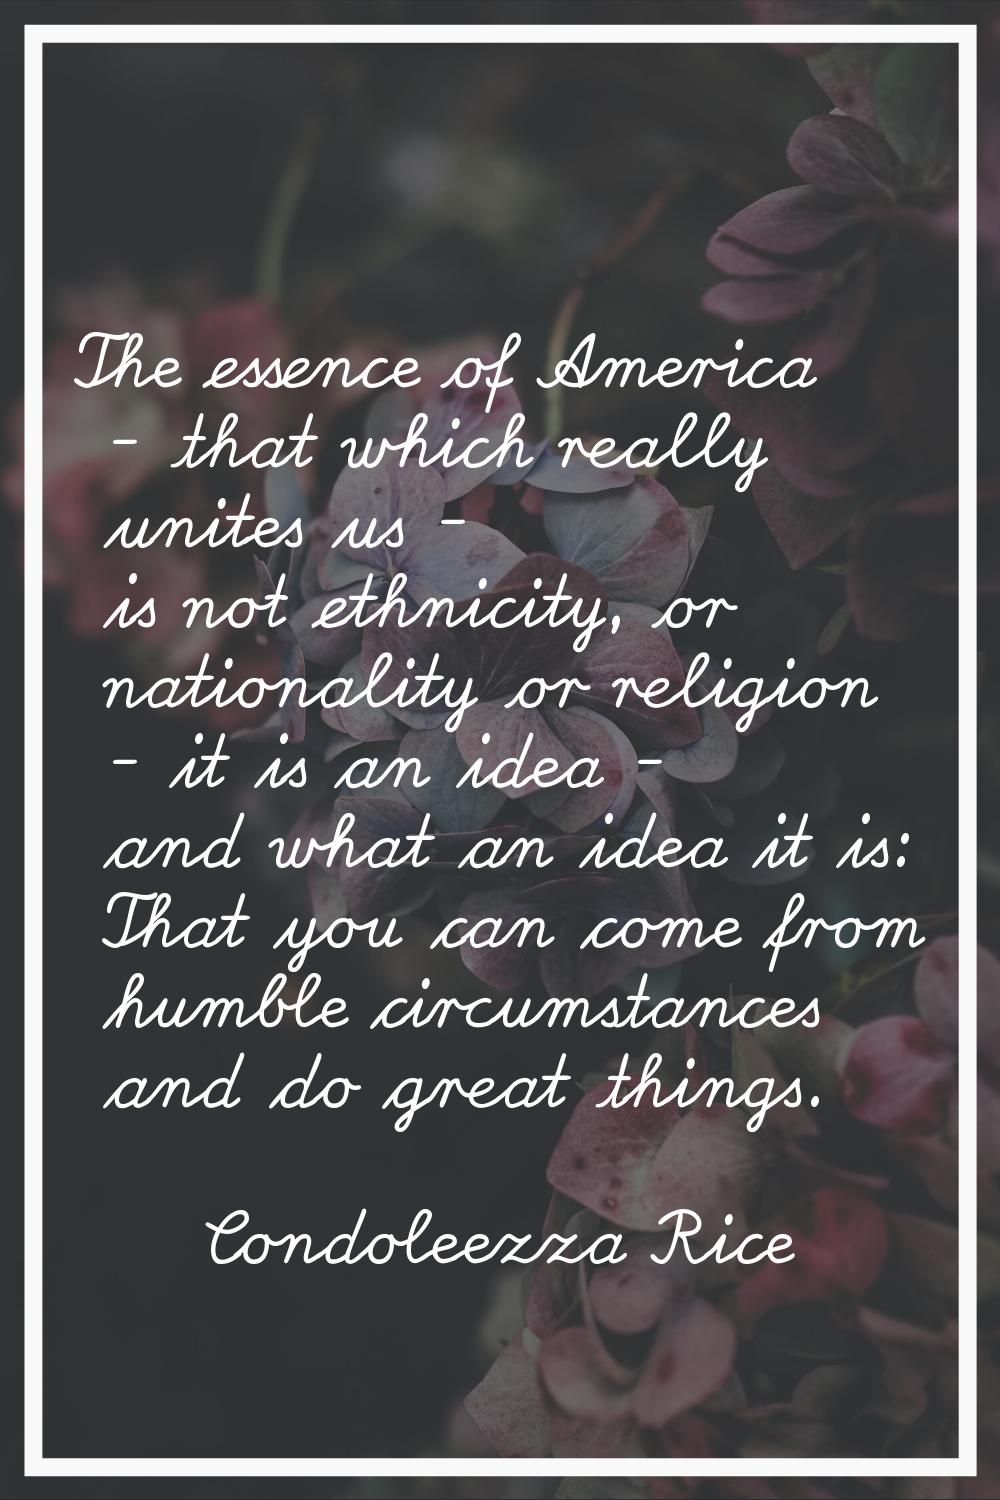 The essence of America - that which really unites us - is not ethnicity, or nationality or religion